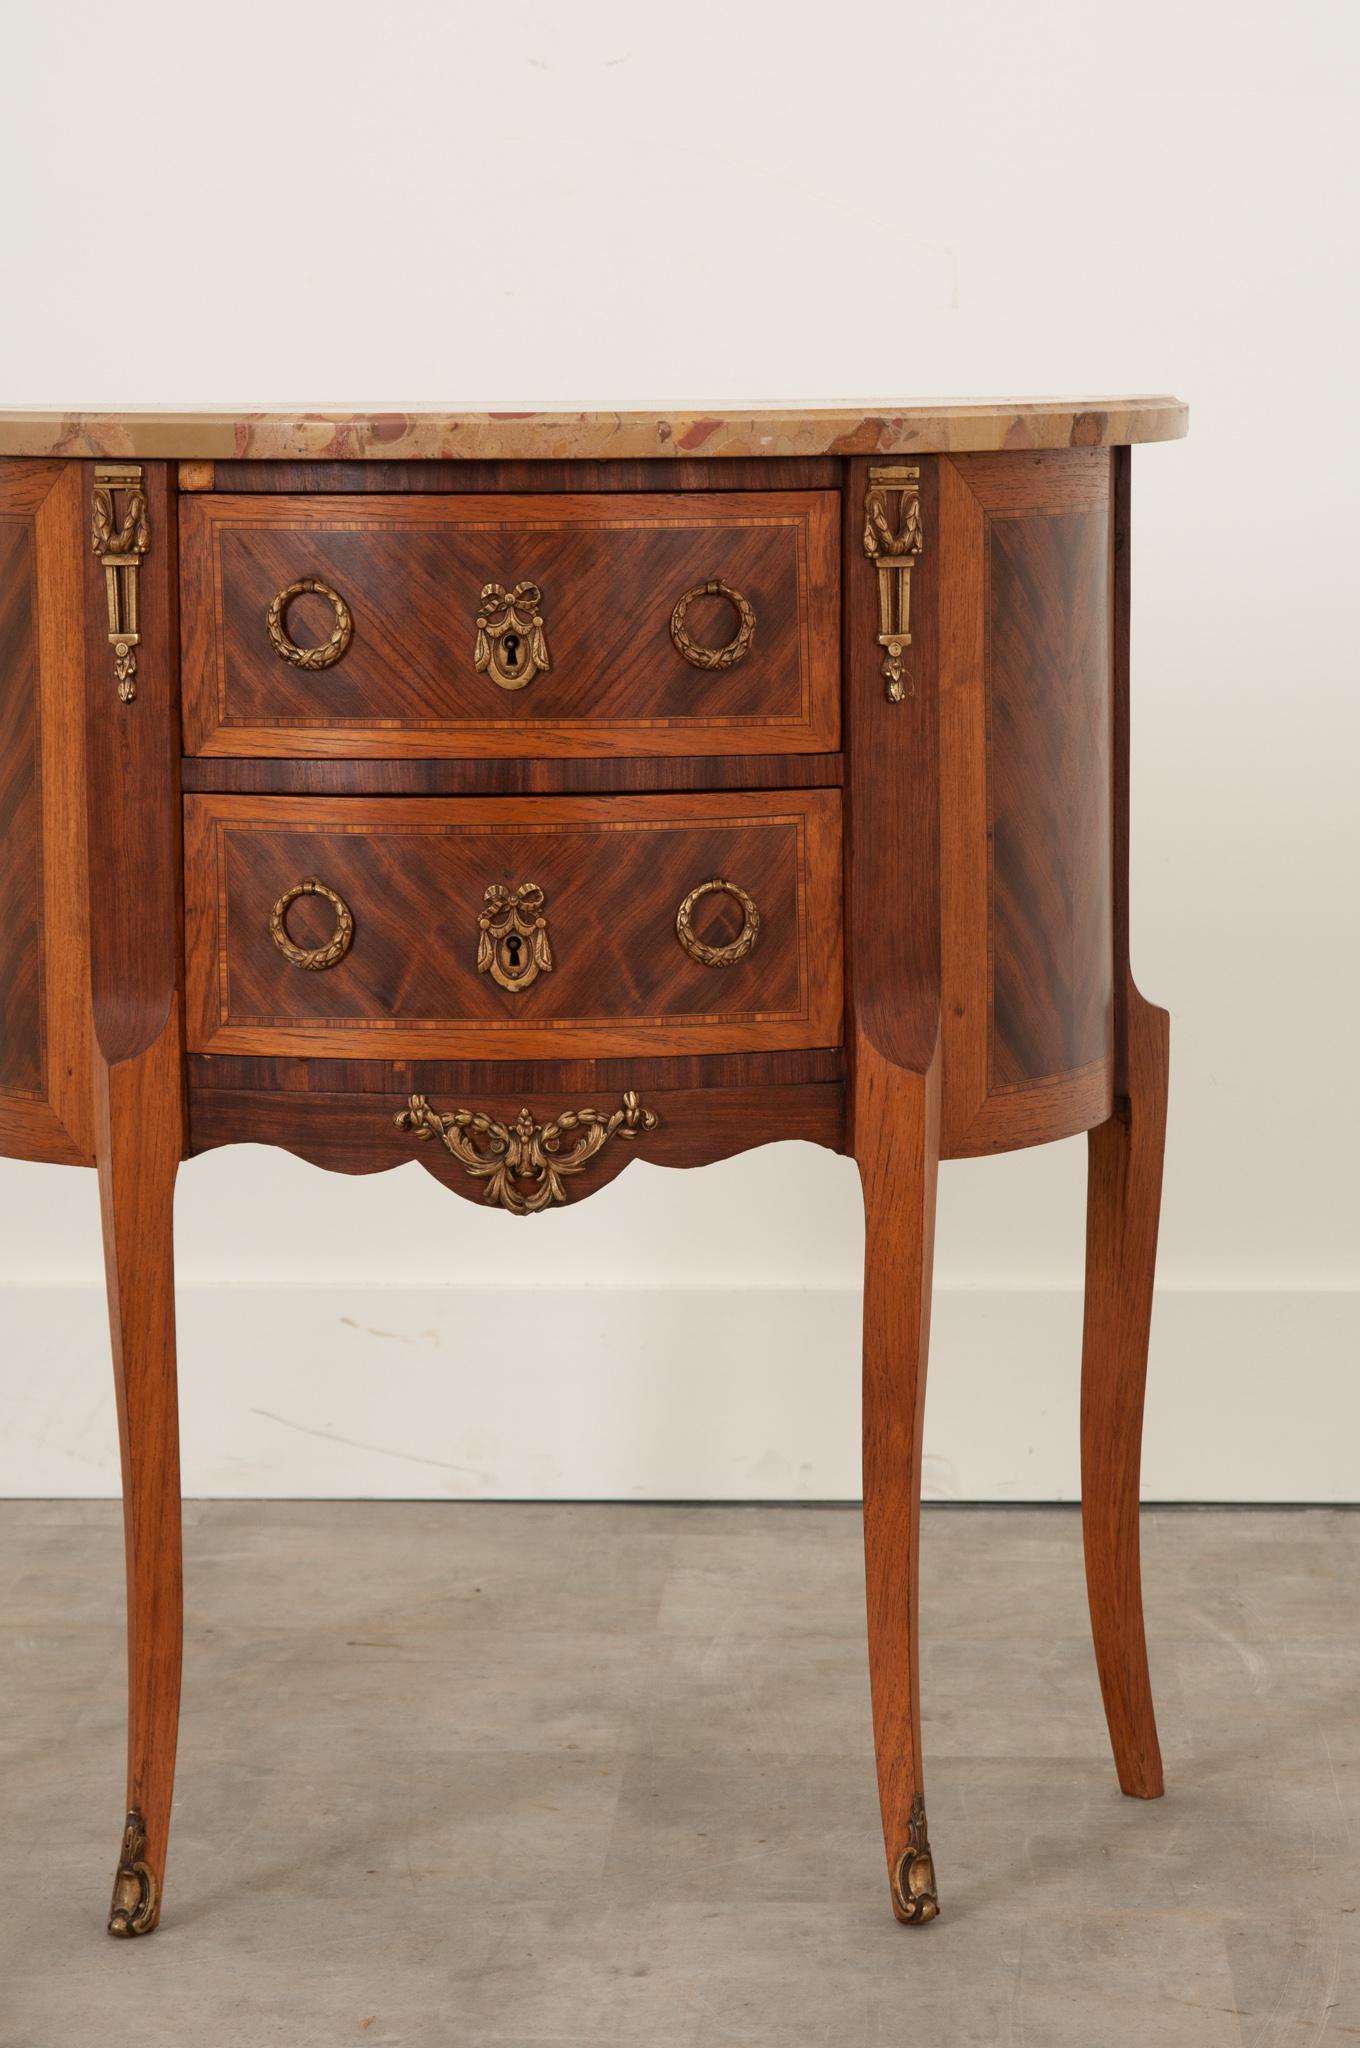 This striking little demilune chest features exceptional inlaid mahogany in varying varieties that have been thoughtfully book matched and placed about the chest to maximize the beauty expressed through its grain. Made in France in 1965, this